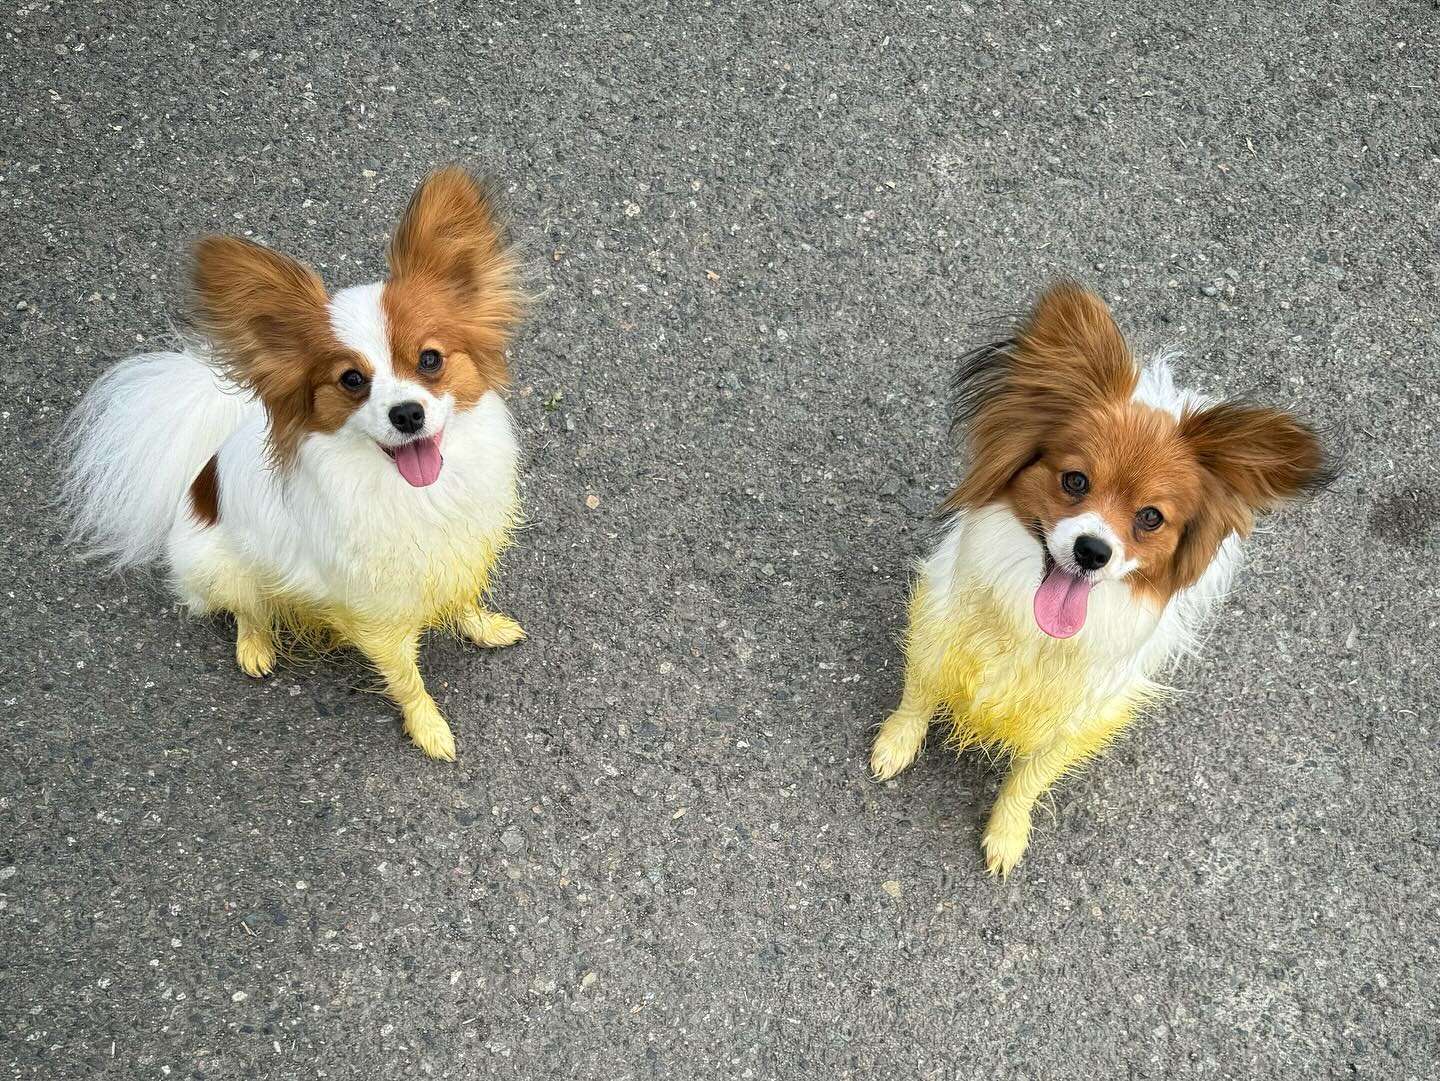 Dandelions vs Gabby and Eevee (thank you to their owner, @myanimaljungle) #papillon #papillons #papillonsofinstagram #papillonlove #papillondog #papillonsofig #puppylove #doggo #dogsofinstagram #dogsofig #doglove #doglife #sablewings